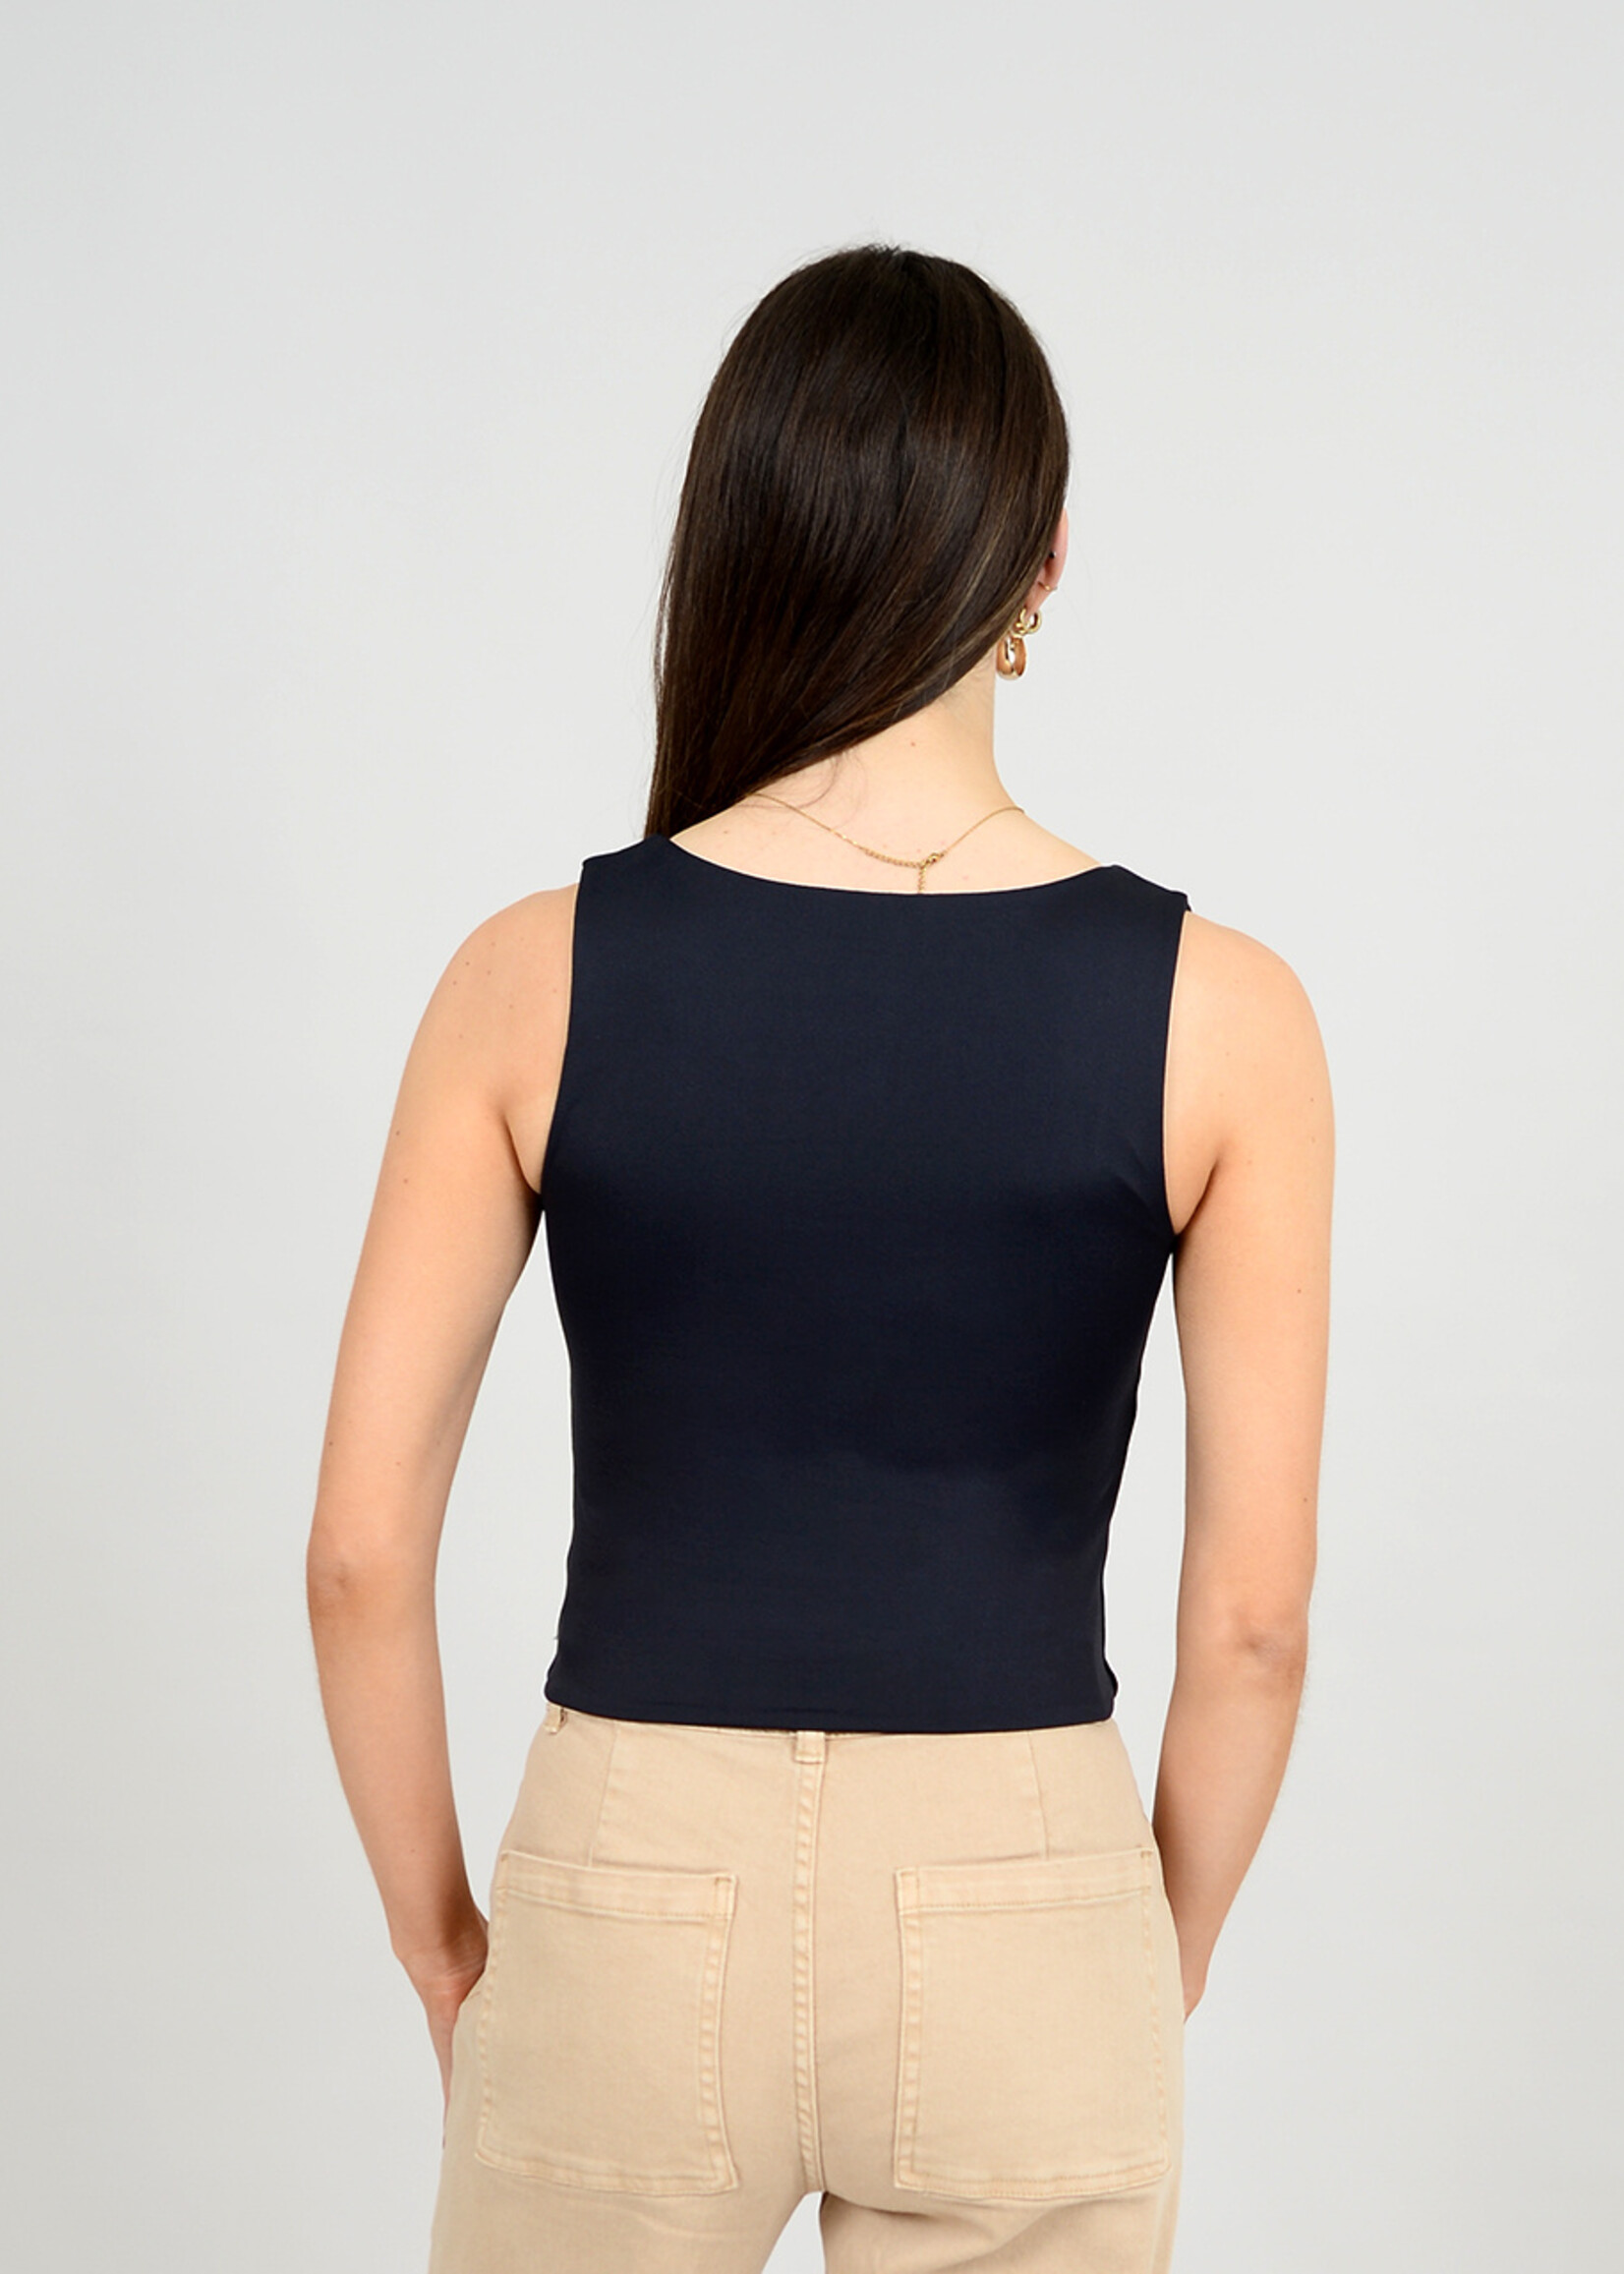 RD STYLE Mariana Uneck Tank